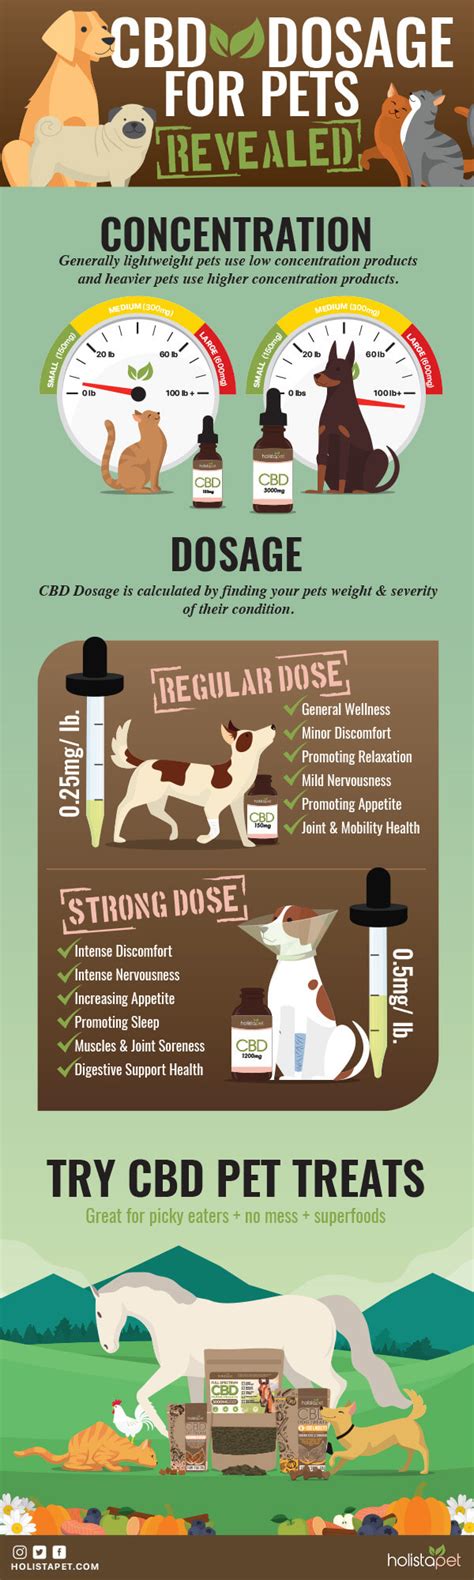  The dosing frequency will depend on the condition being treated and the response of your pet to the CBD